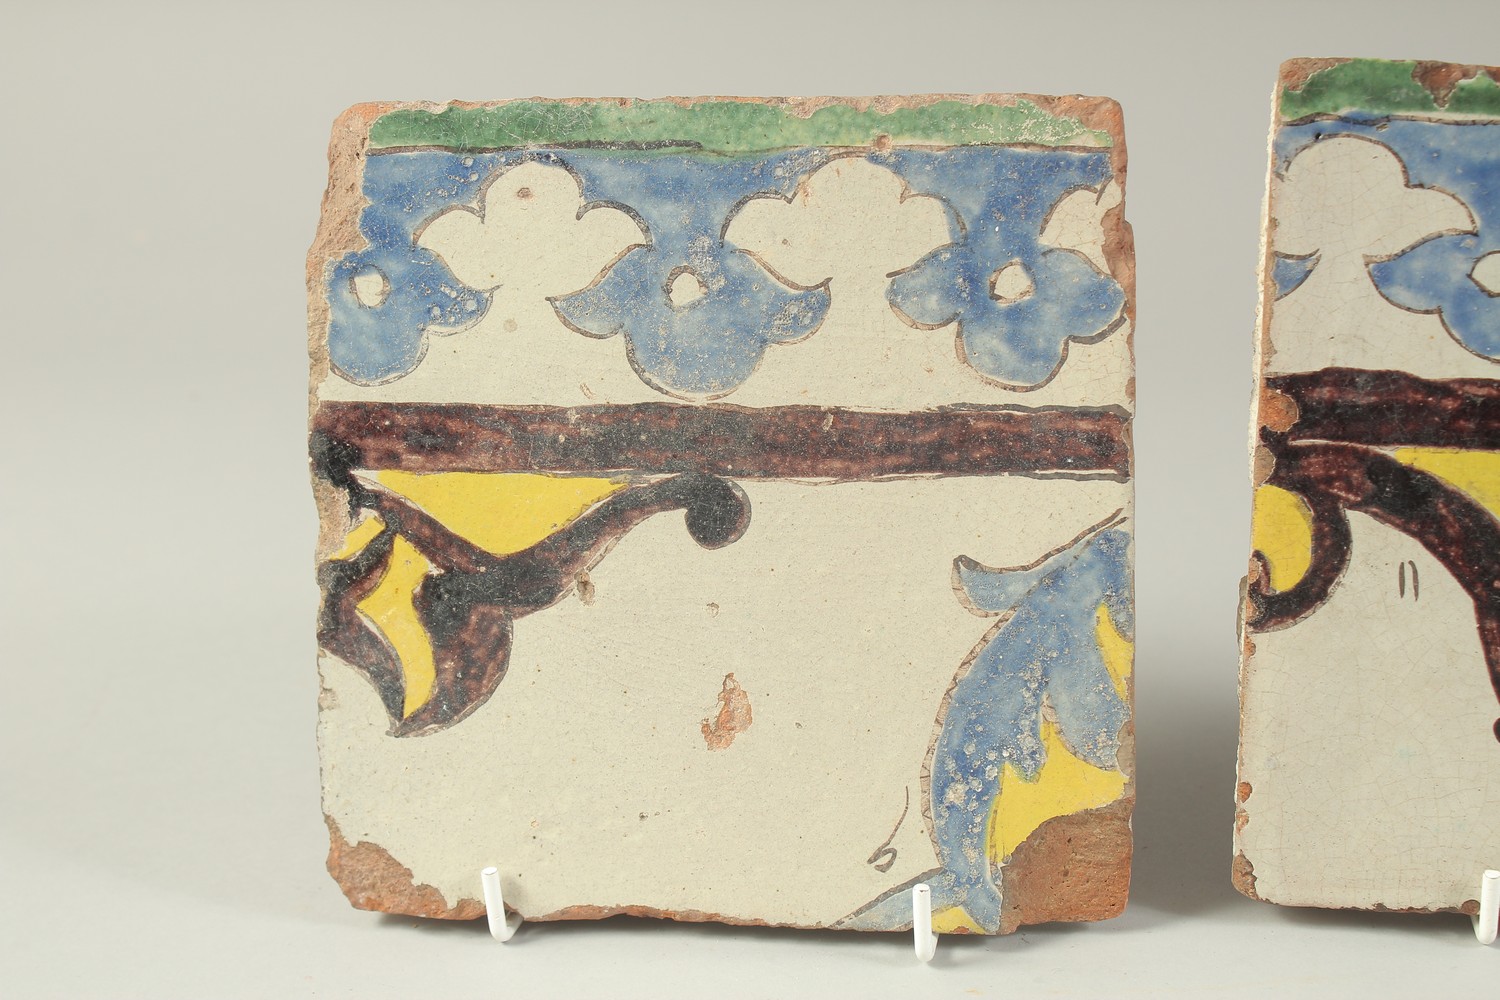 TWO EARLY 19TH CENTURY PERSIAN QAJAR GLAZED POTTERY TILES, 16cm x 16.5cm each, (2). - Image 2 of 3